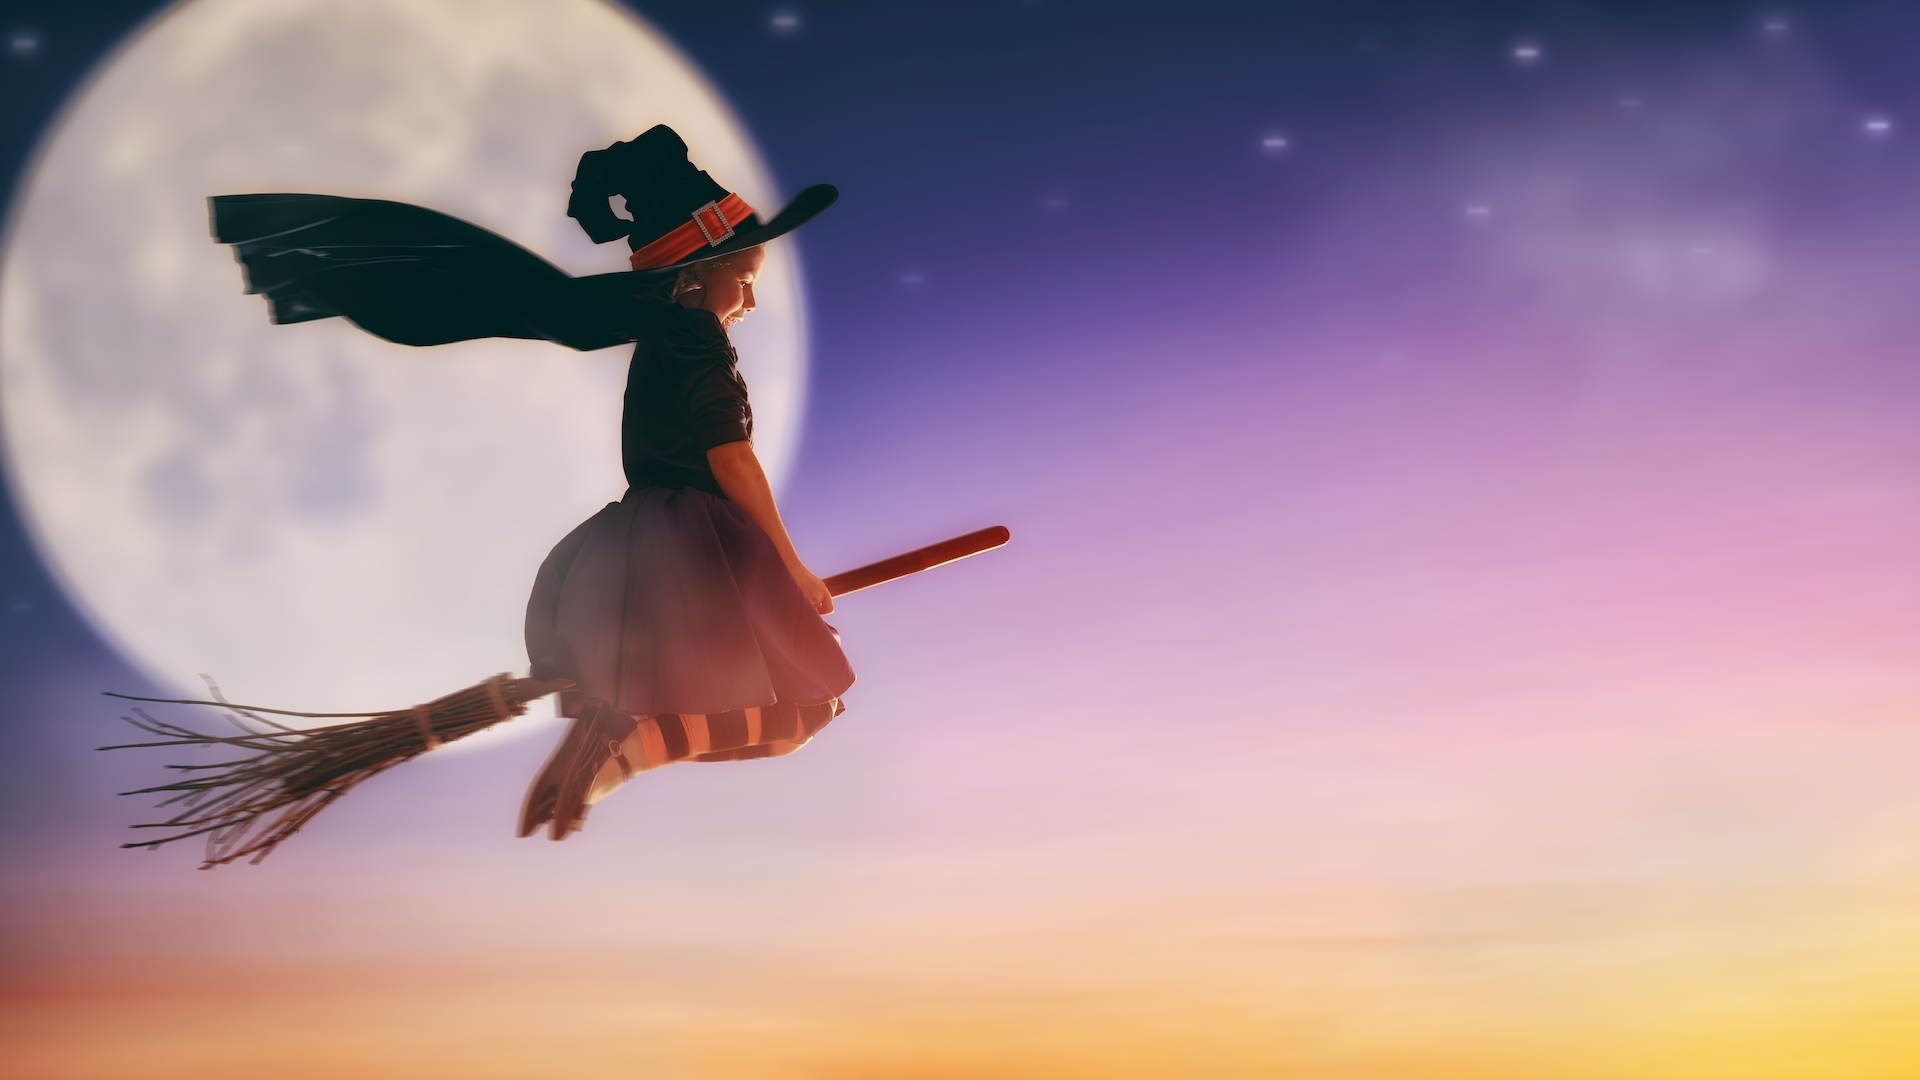 A witch flying on a broomstick